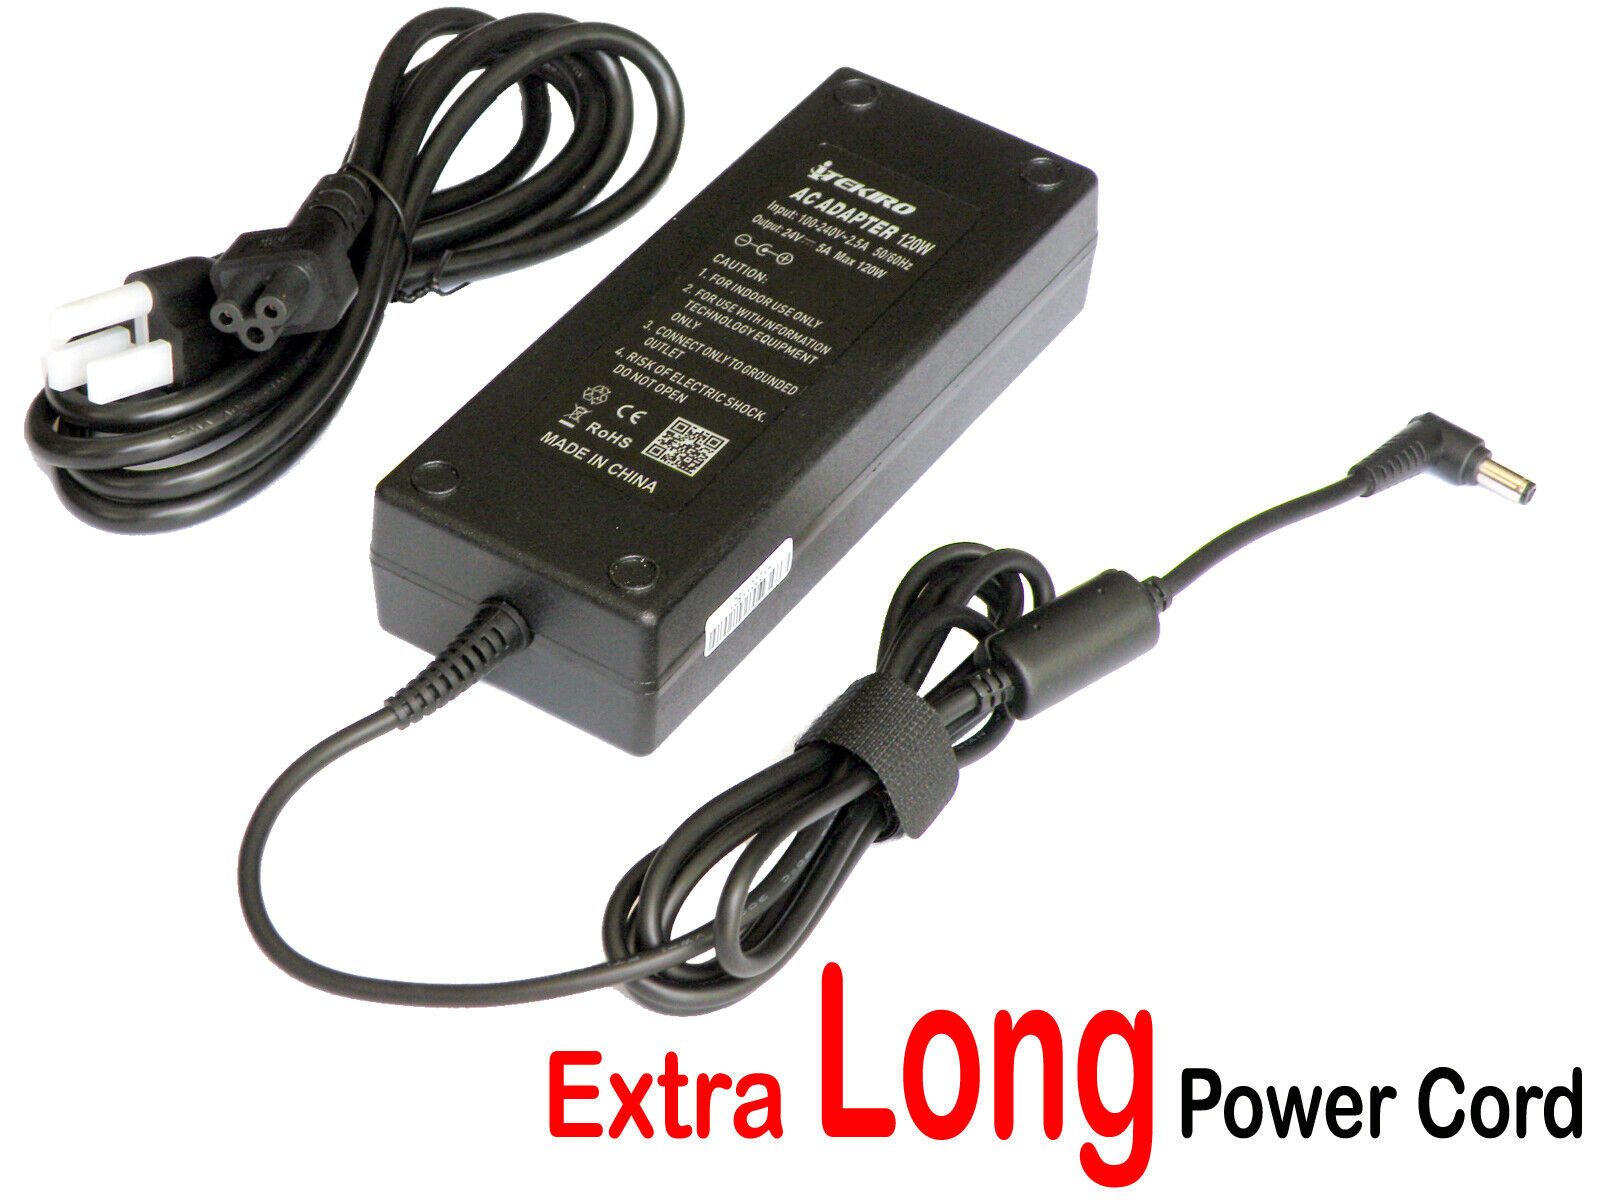 120W AC Adapter Charger for Inogen G5 Portable BA-501 MANGO120S-24CB-ING, 24V 5A